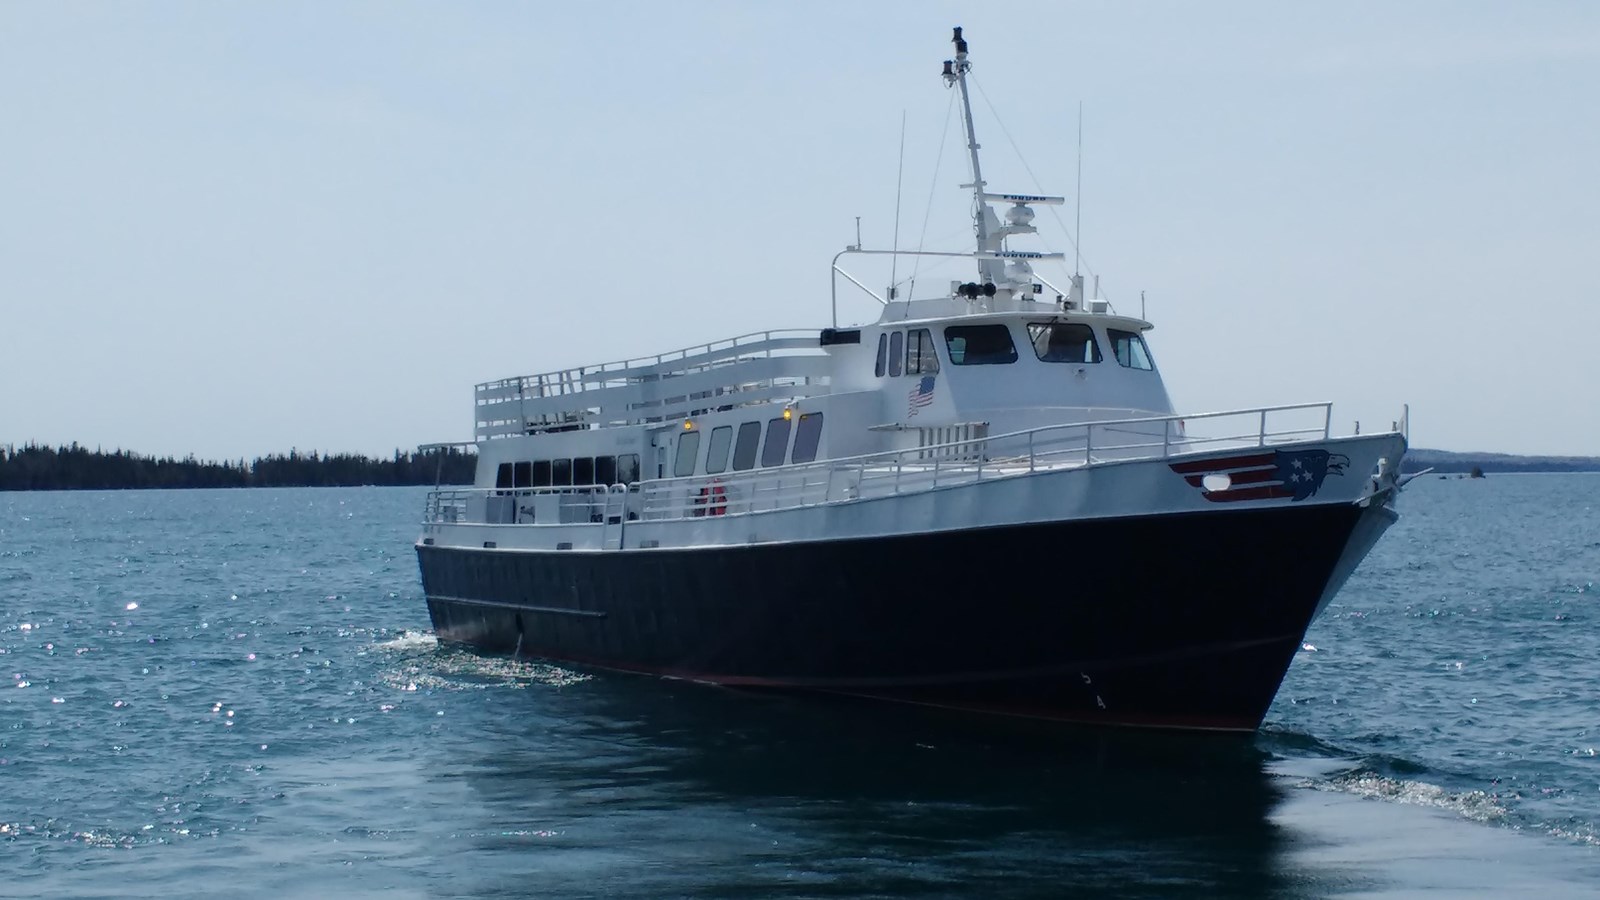 Isle Royale Queen IV, a passenger ferry, on Lake Superior. 